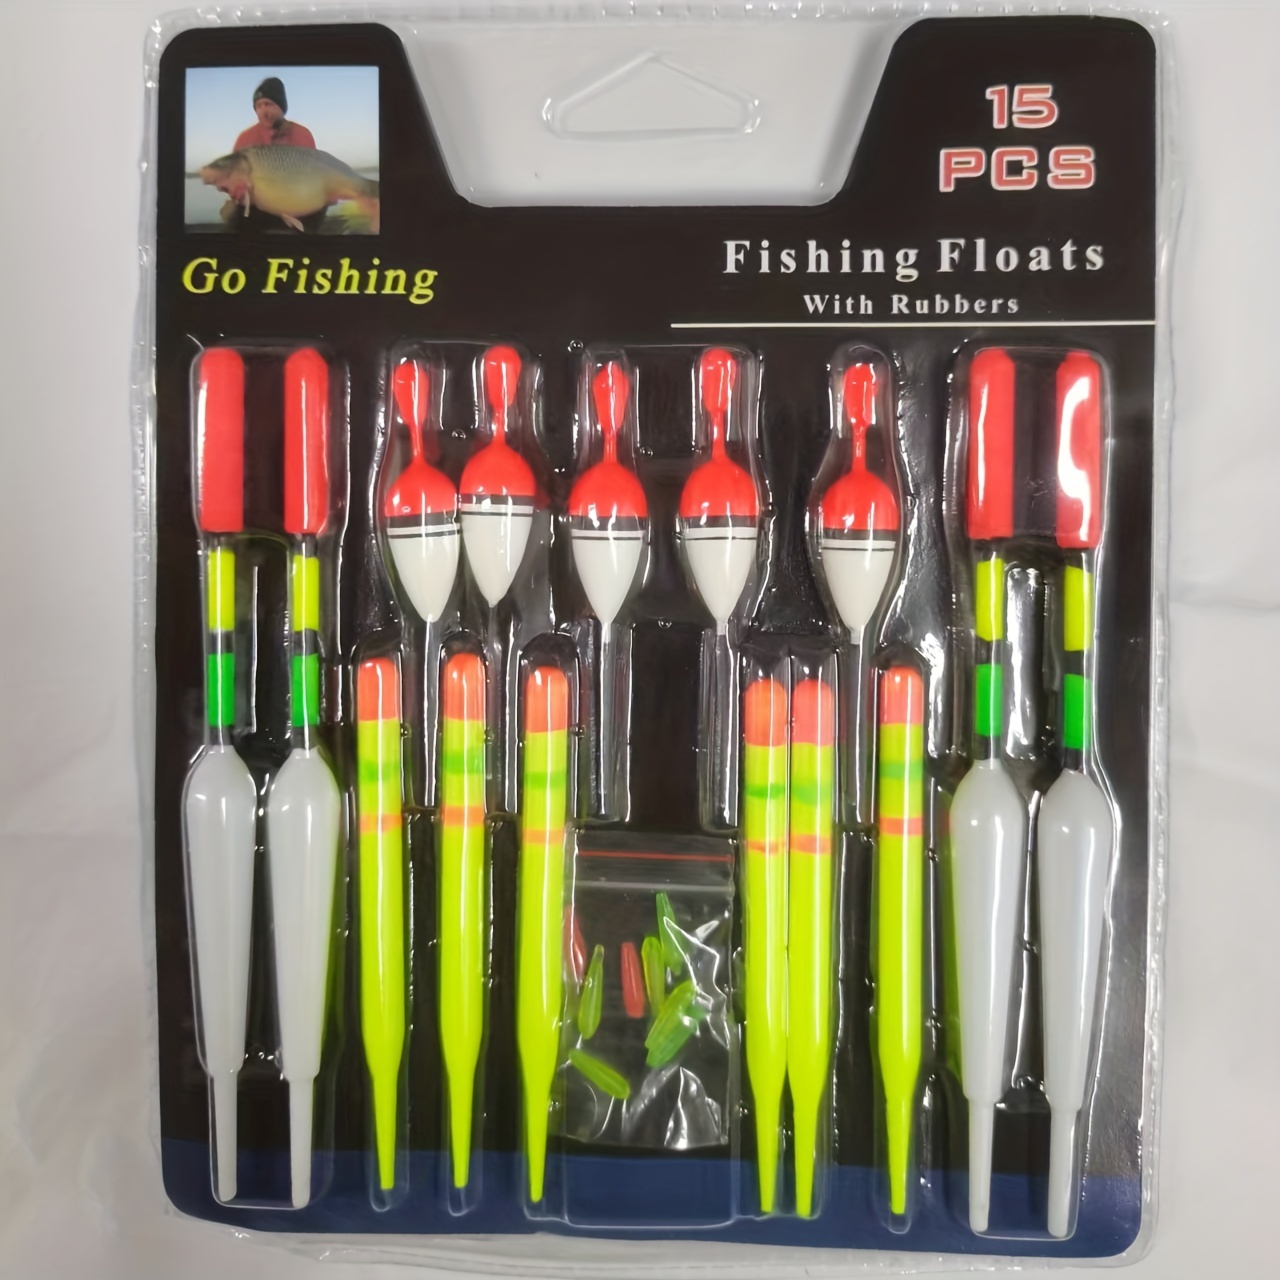 1 Set Of Fishing Lure Indicators: Slip Bobbers For Bass, Trout, Salmon &  More - Perfect For Saltwater & Freshwater Fishing!